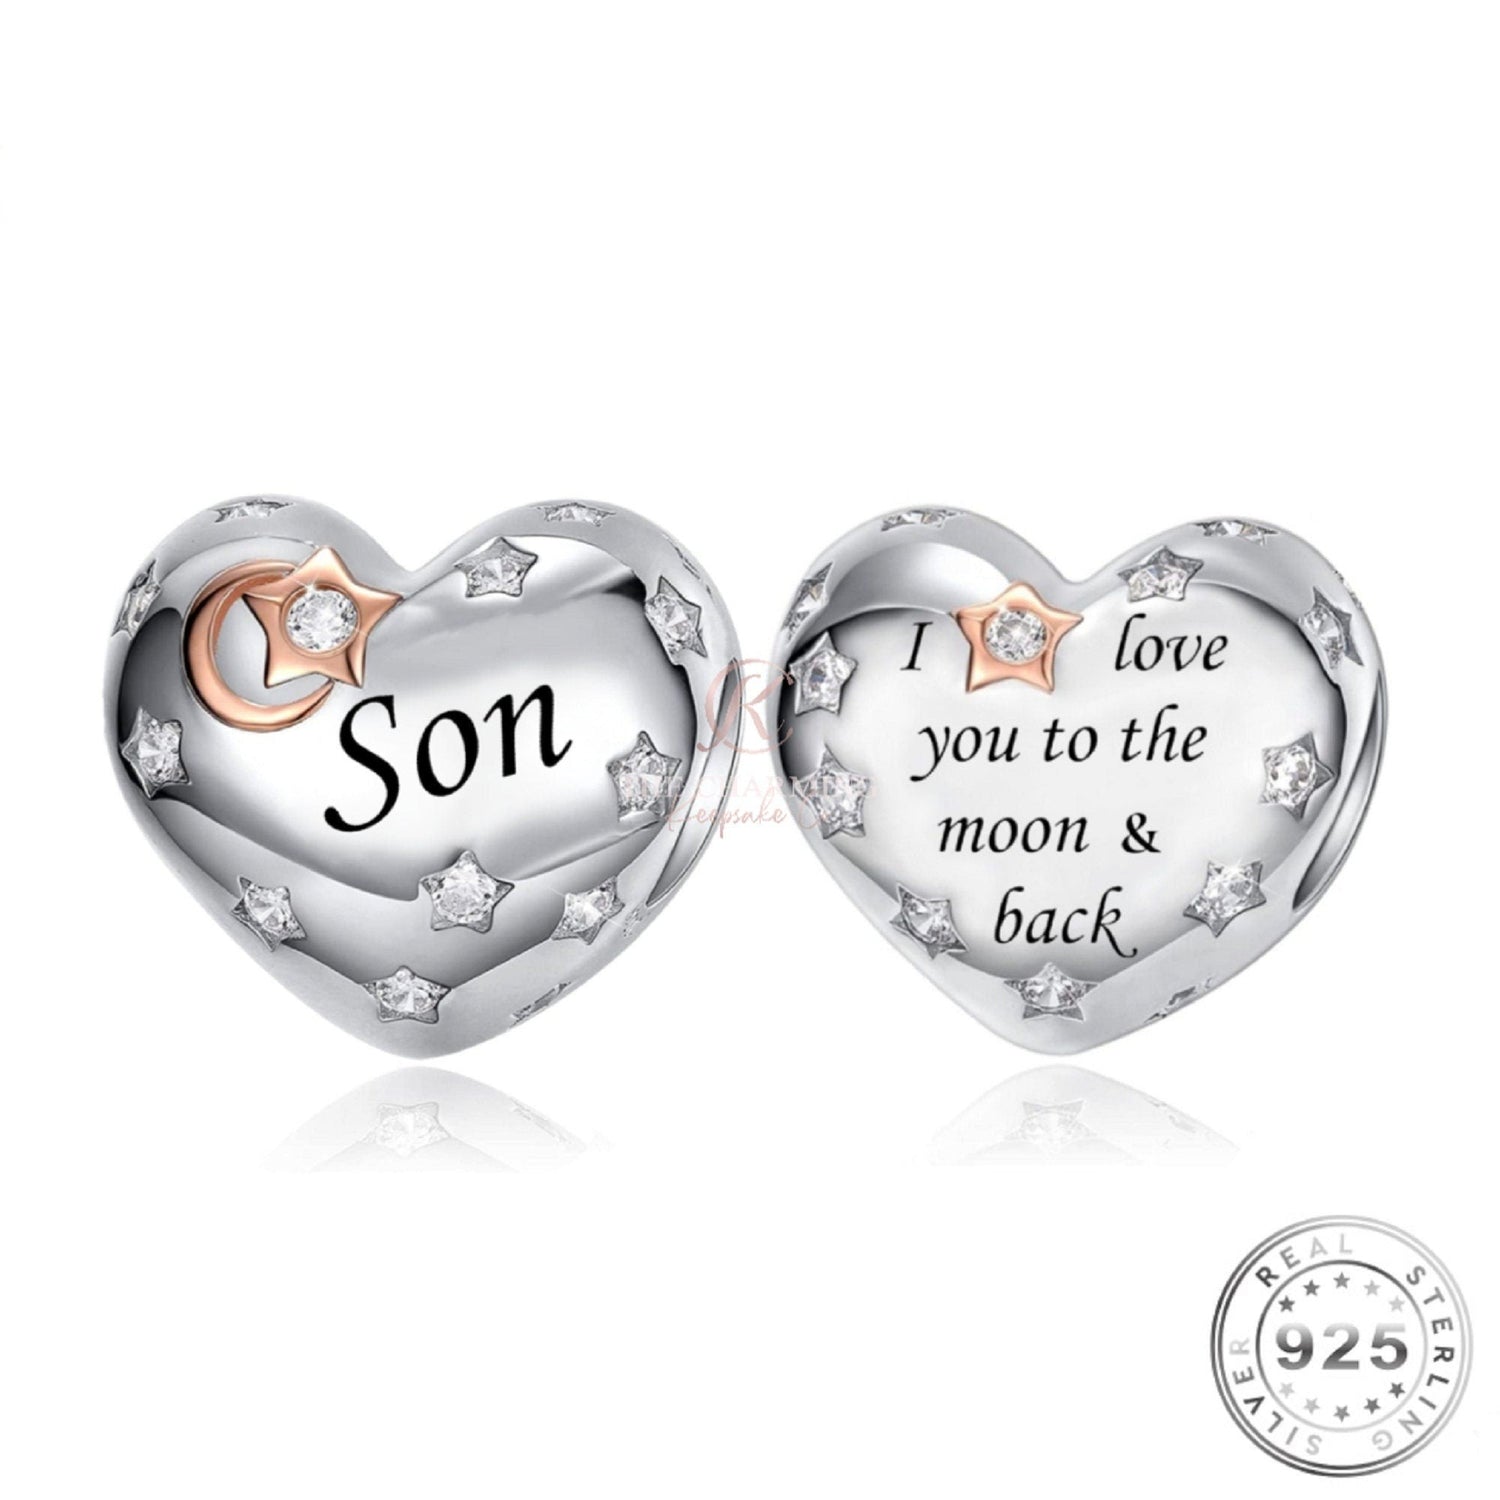 Son Charm 925 Sterling Silver Love You to the Moon & Back fits pandora